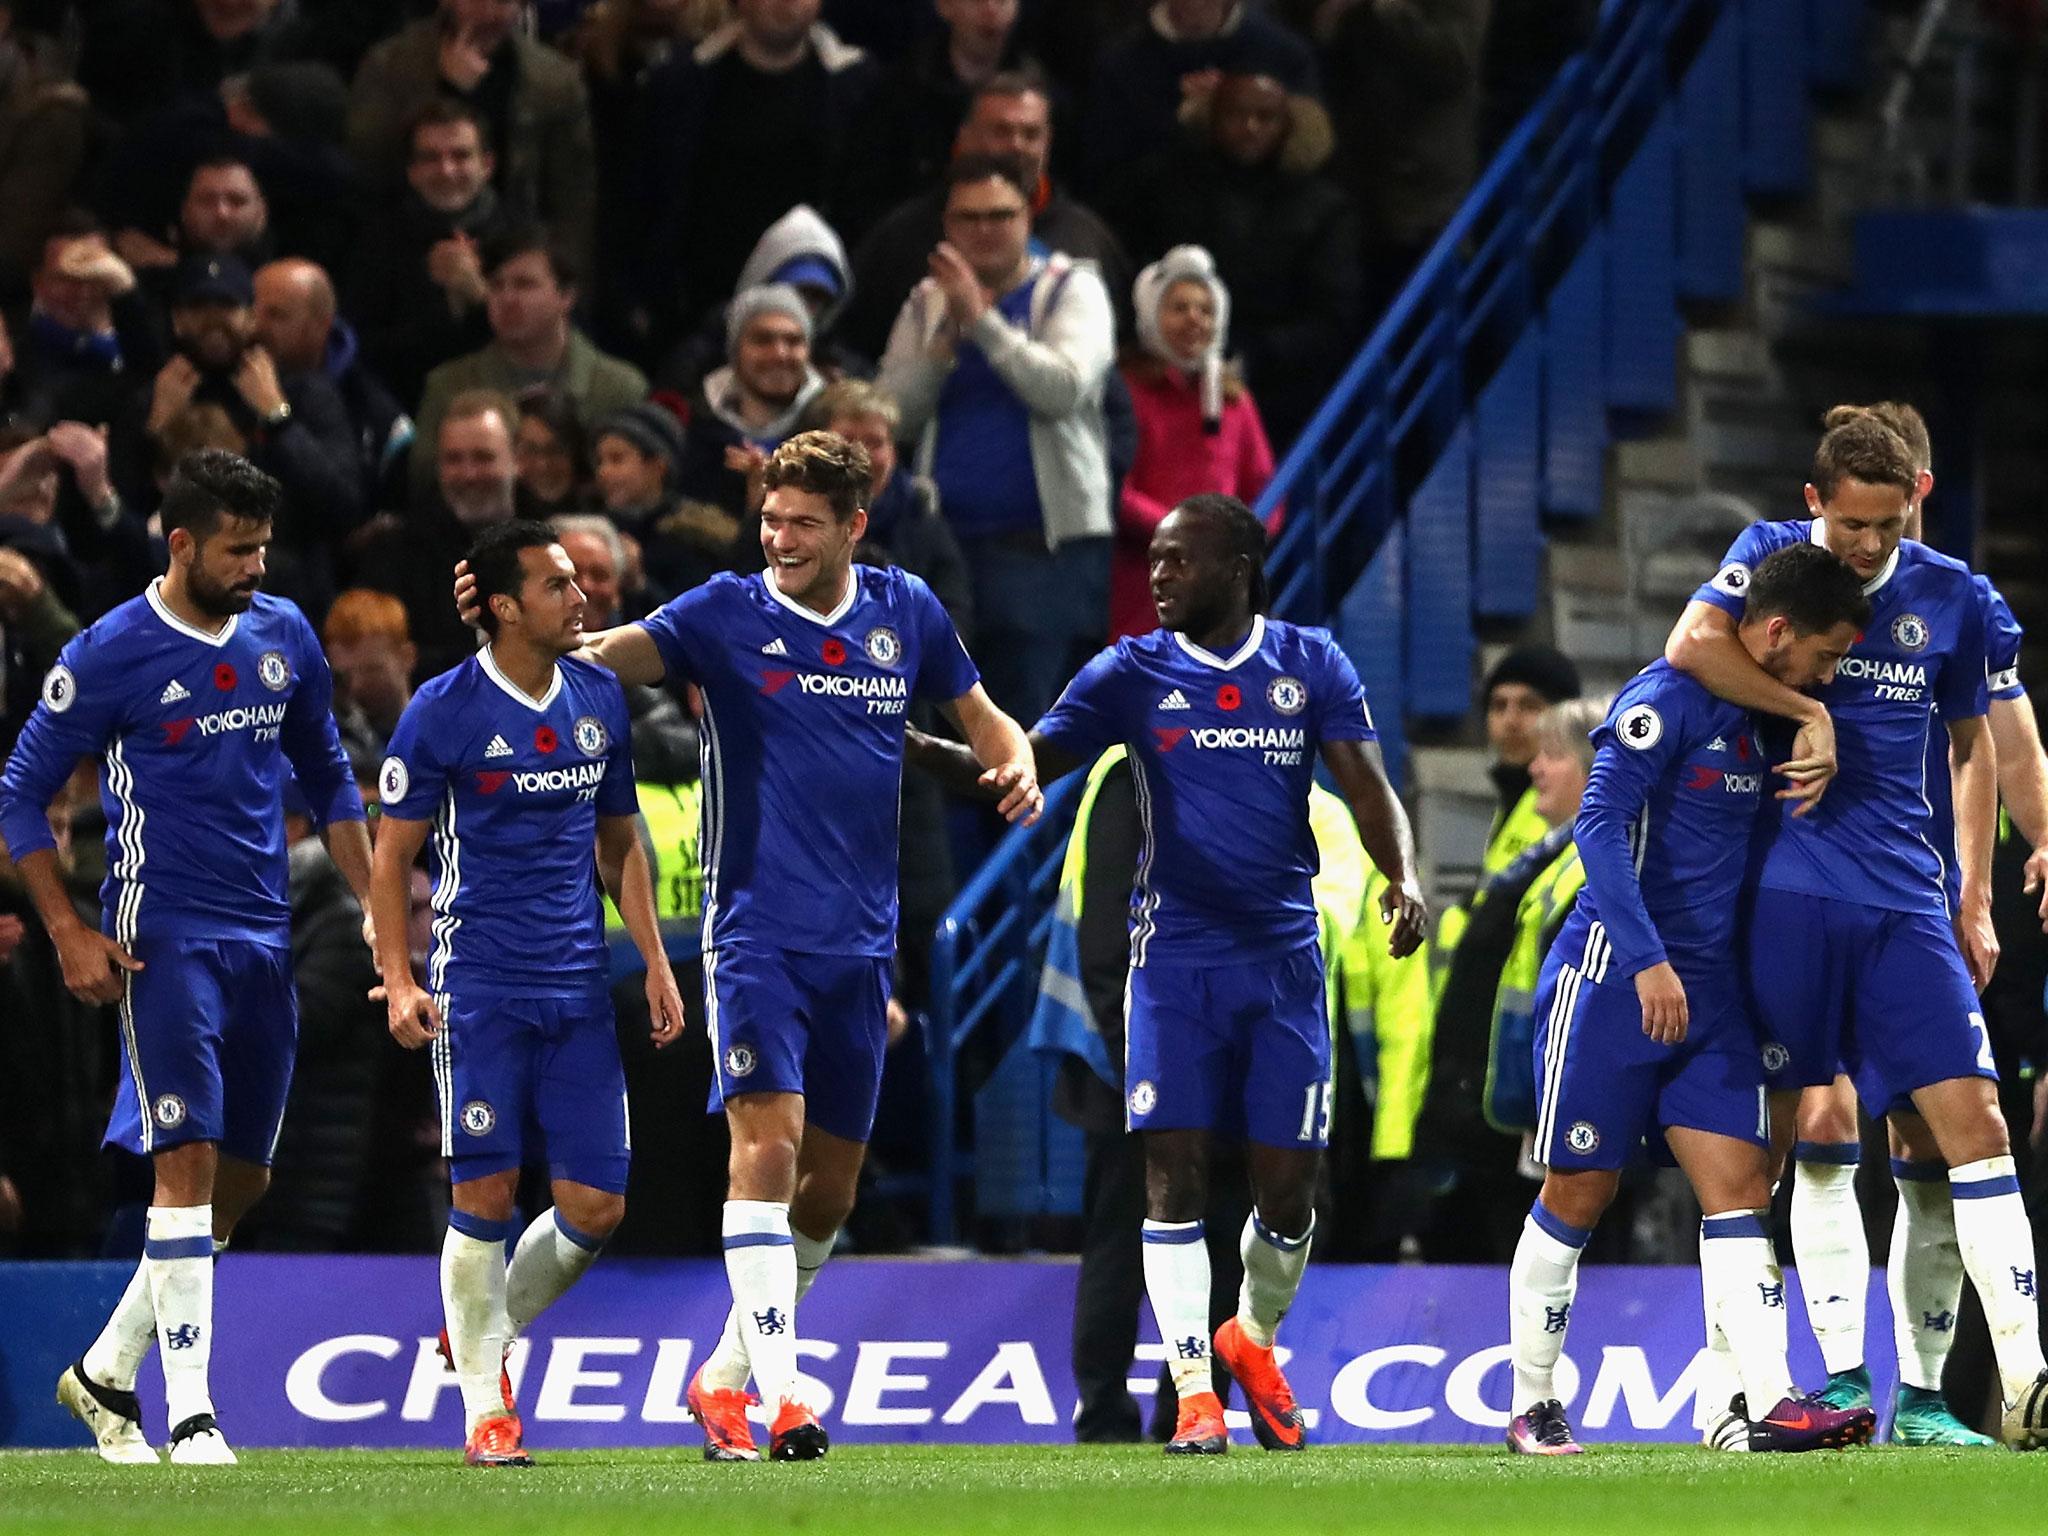 Chelsea are loving life under Antonio Conte and could go six points clear tonight